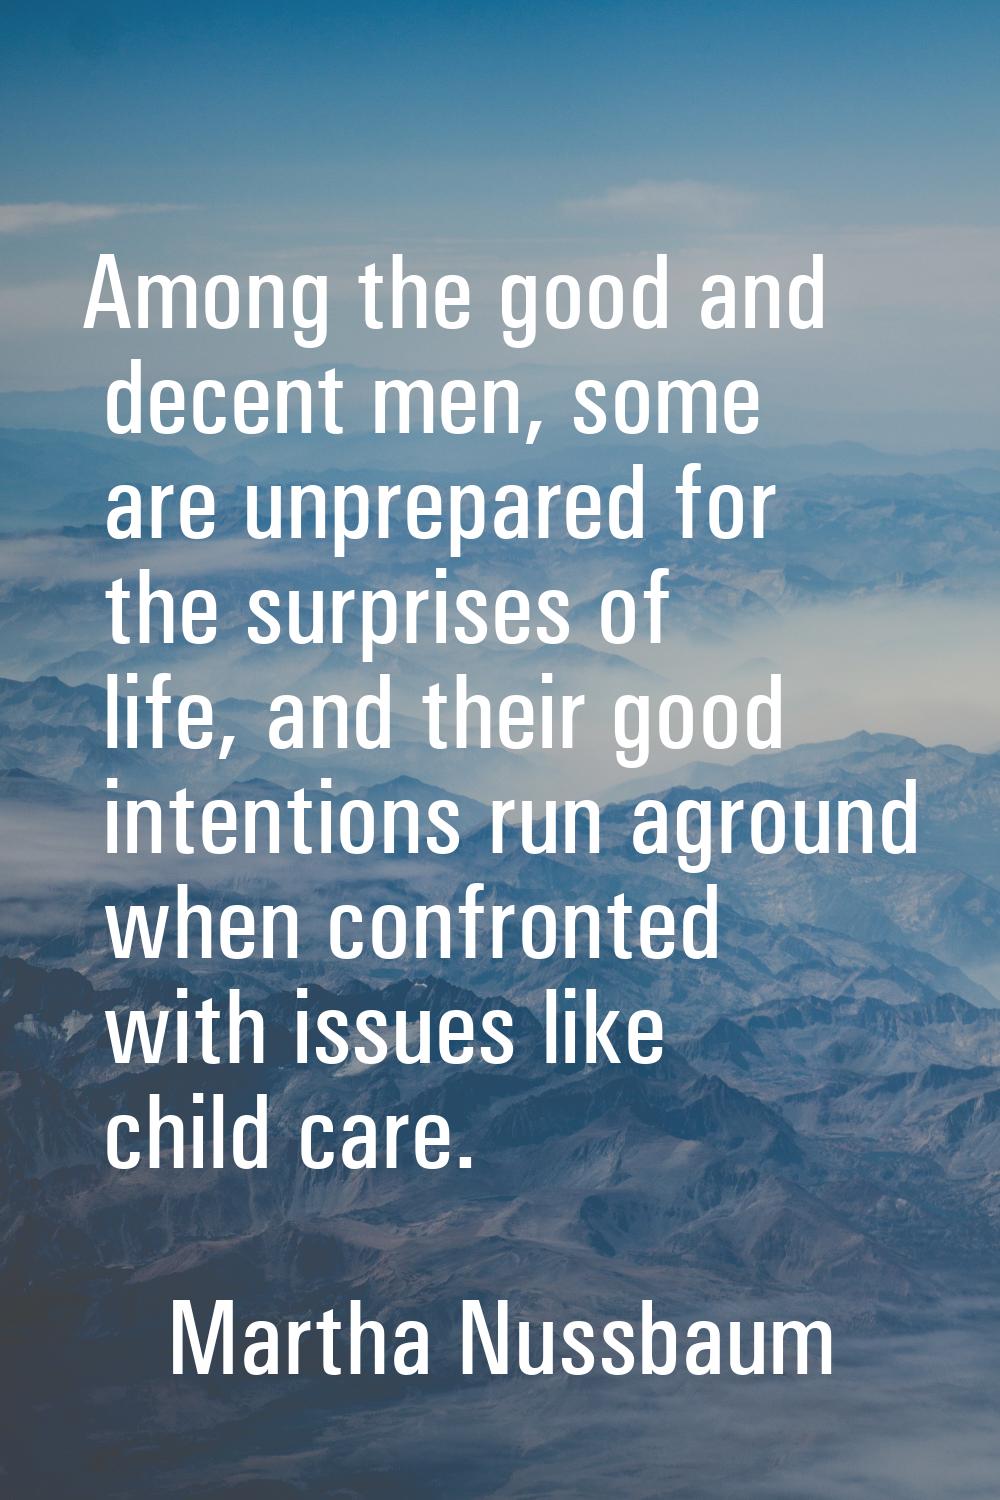 Among the good and decent men, some are unprepared for the surprises of life, and their good intent